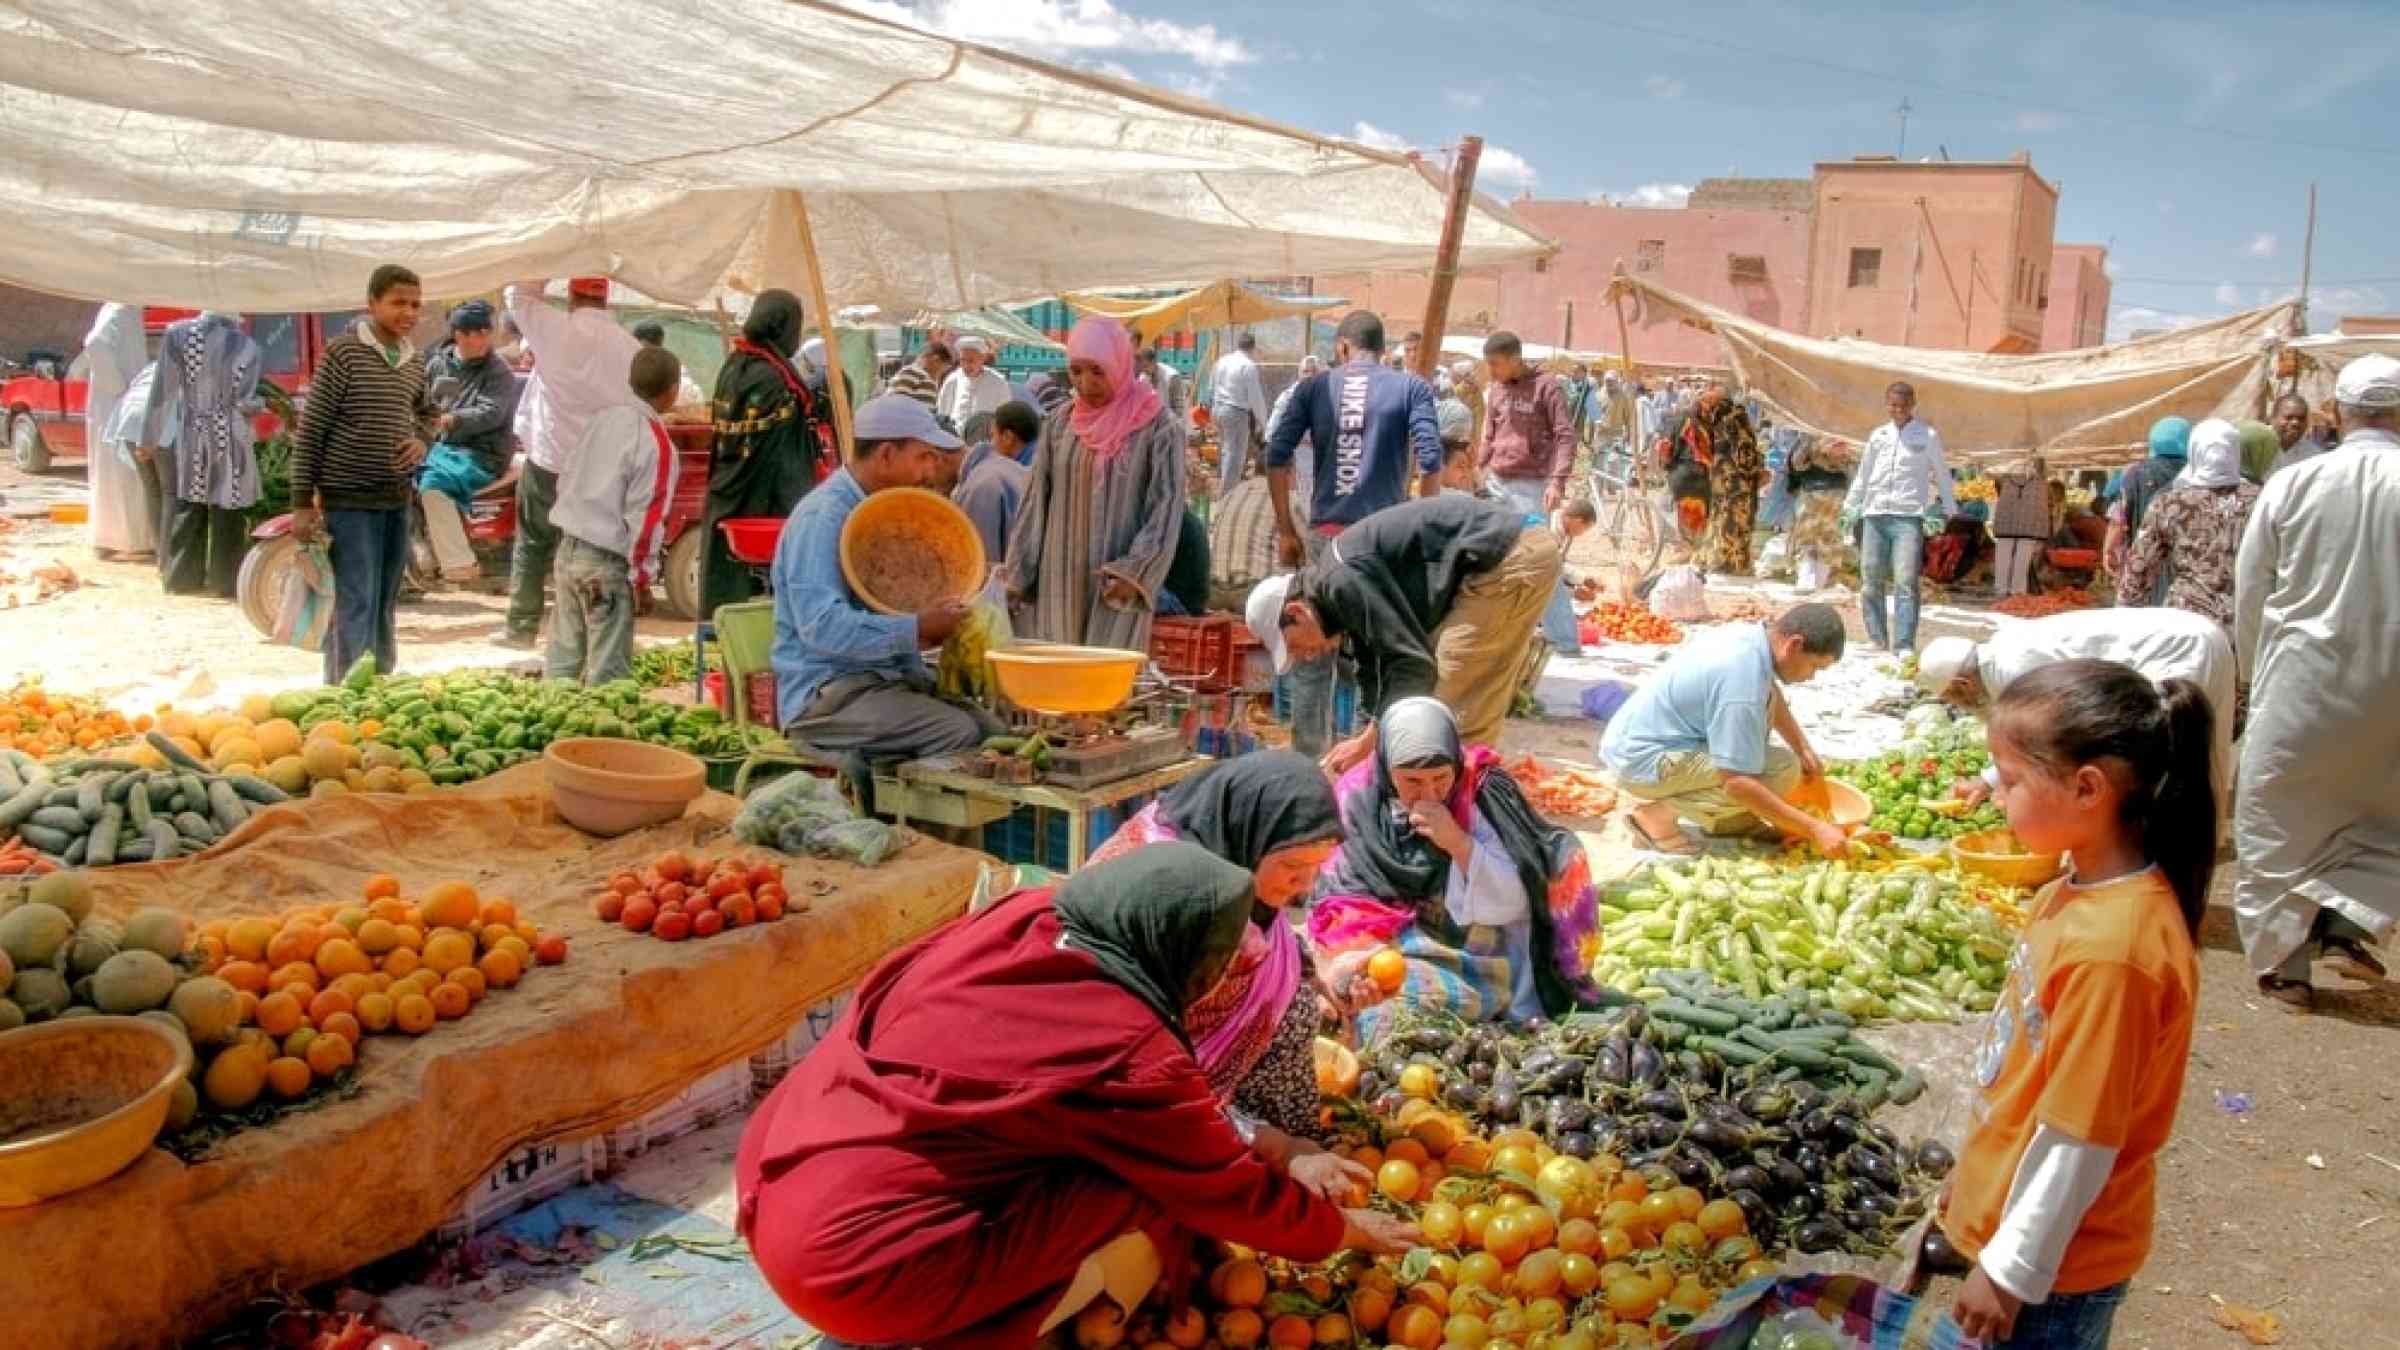 Weekmarket in the city of Marrakech. Morocco produces a large range of Mediterranean fruits and vegetables and even some tropical ones.